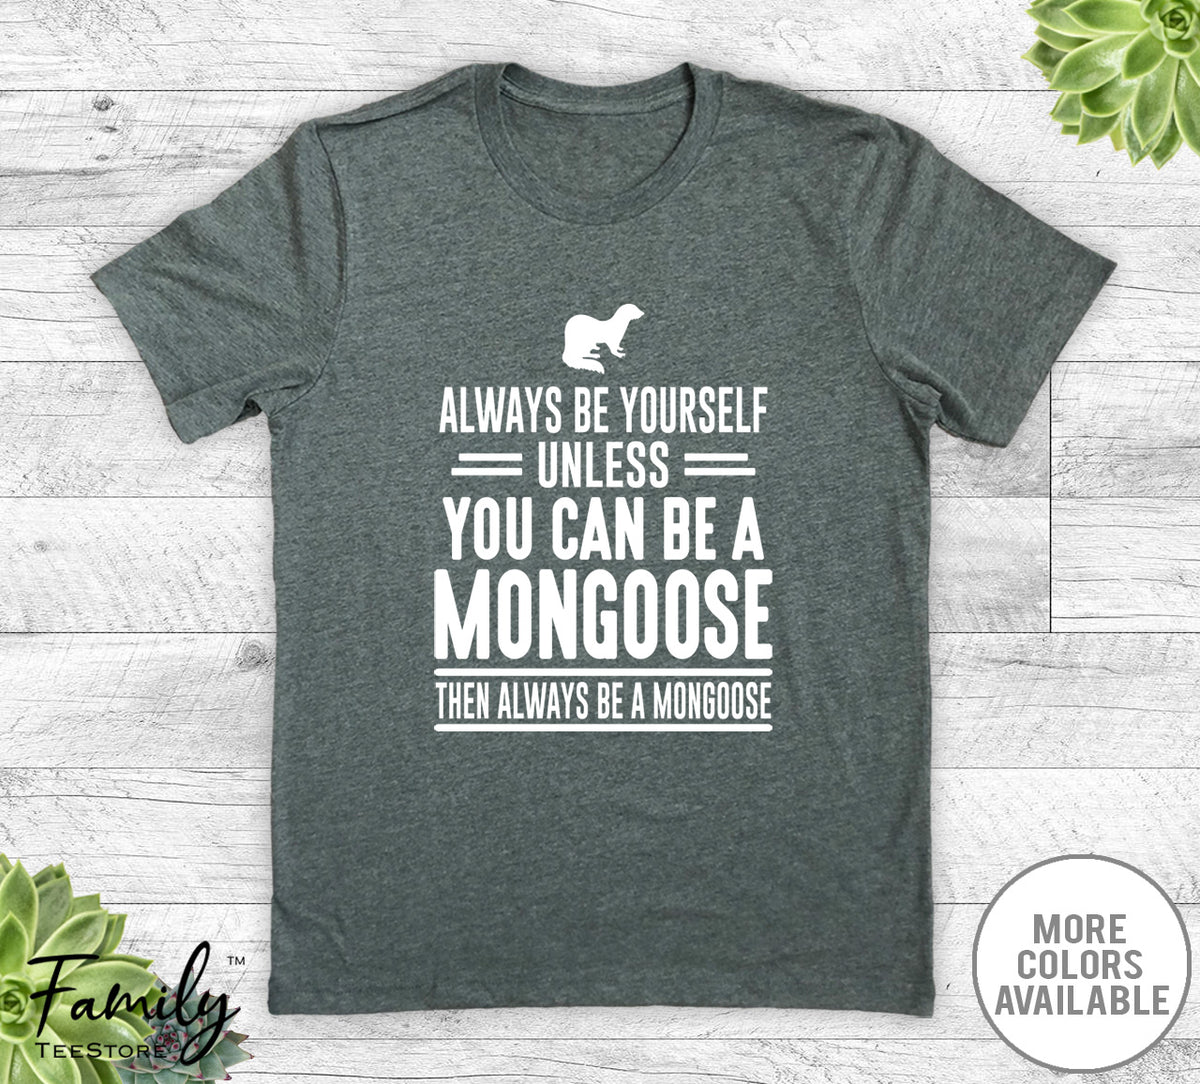 Always Be Yourself Unless You Can Be A Mongoose - Unisex T-shirt - Mongoose Shirt - Mongoose Gift - familyteeprints